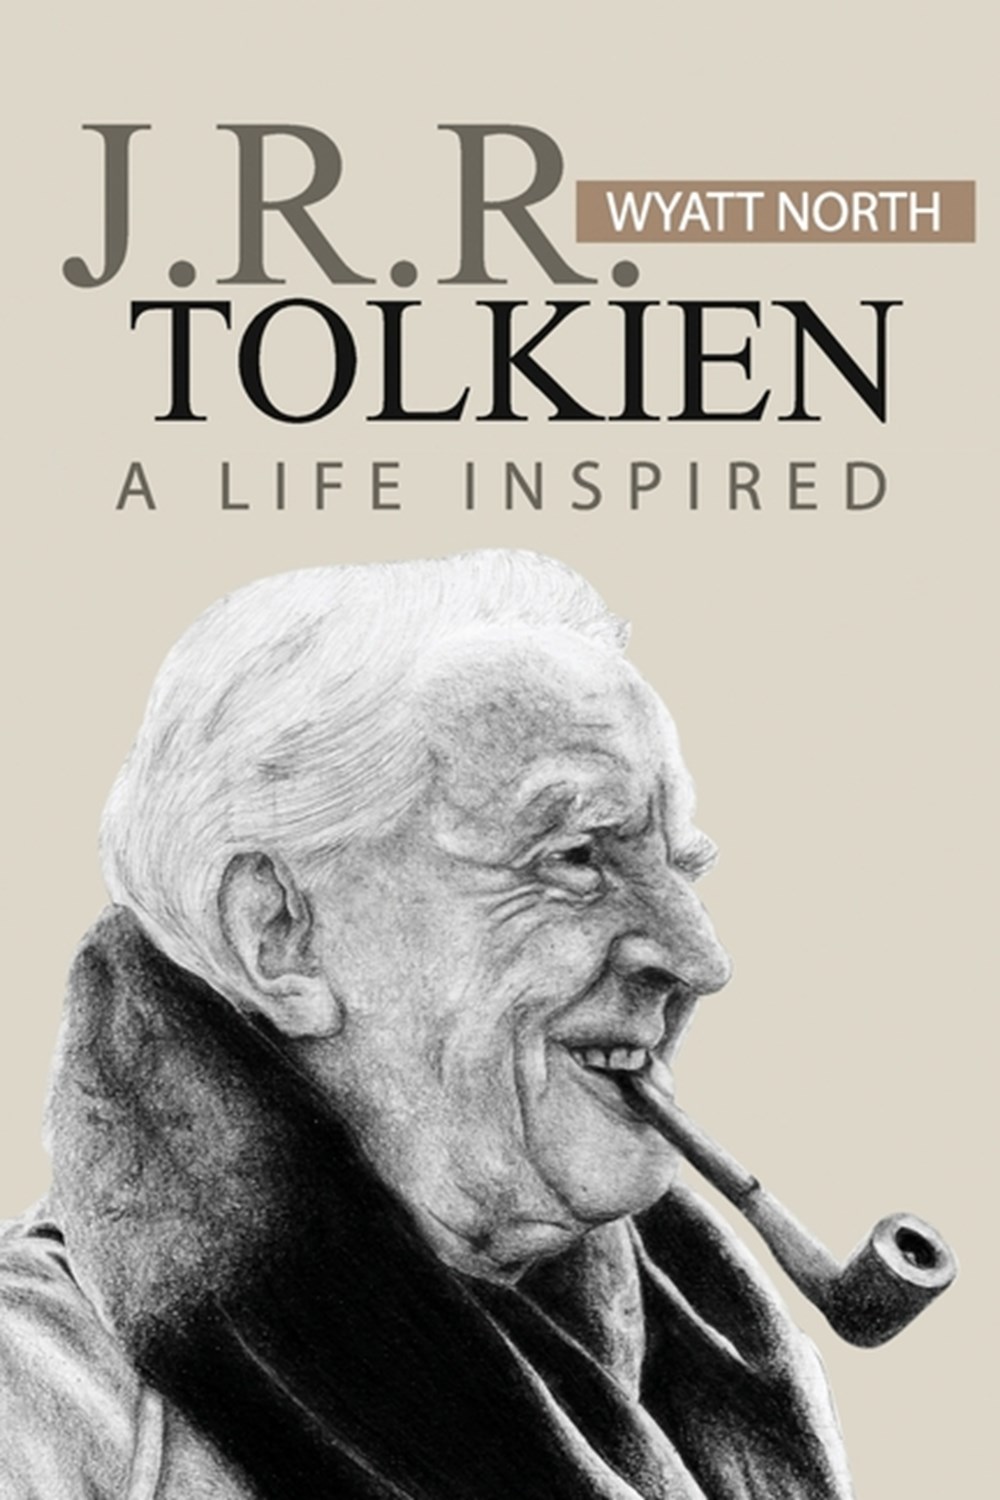 J.R.R. Tolkien A Life Inspired